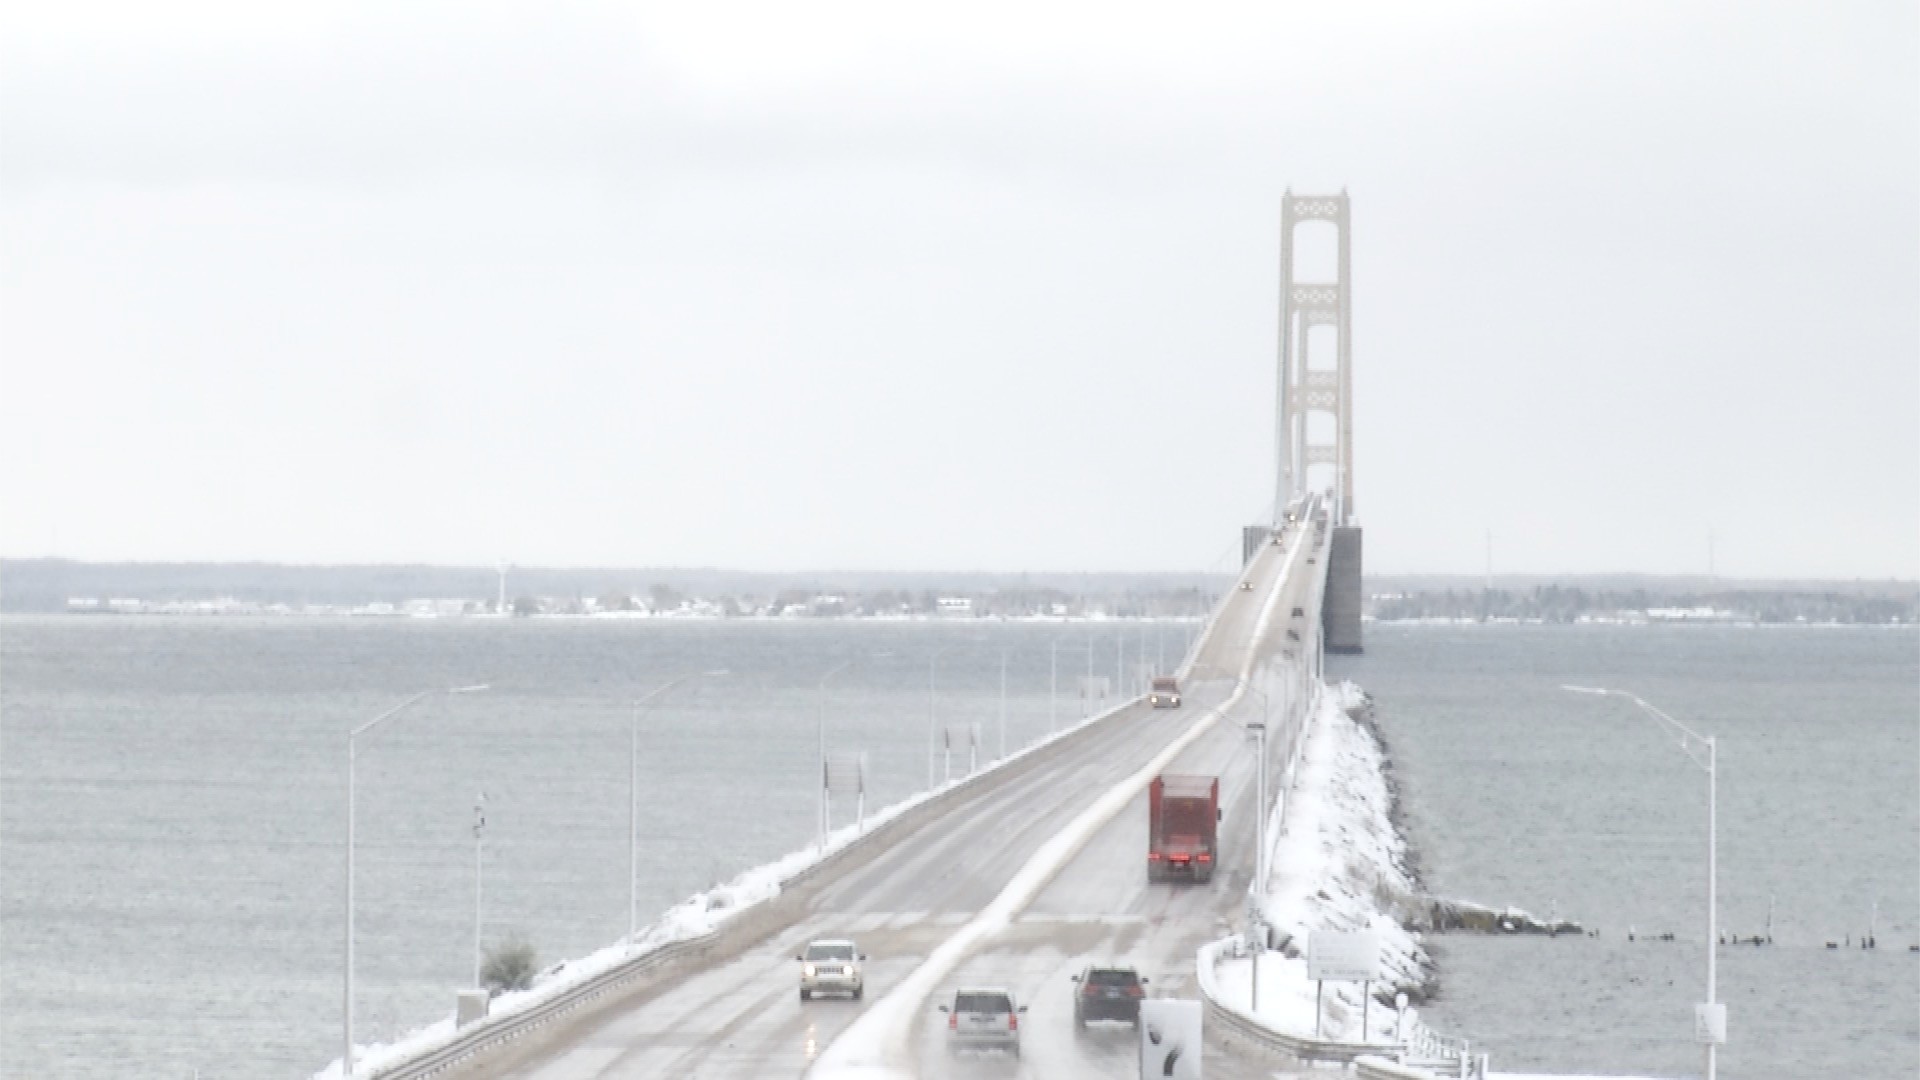 UPDATE: Mackinac Bridge reopen after issues with falling ice